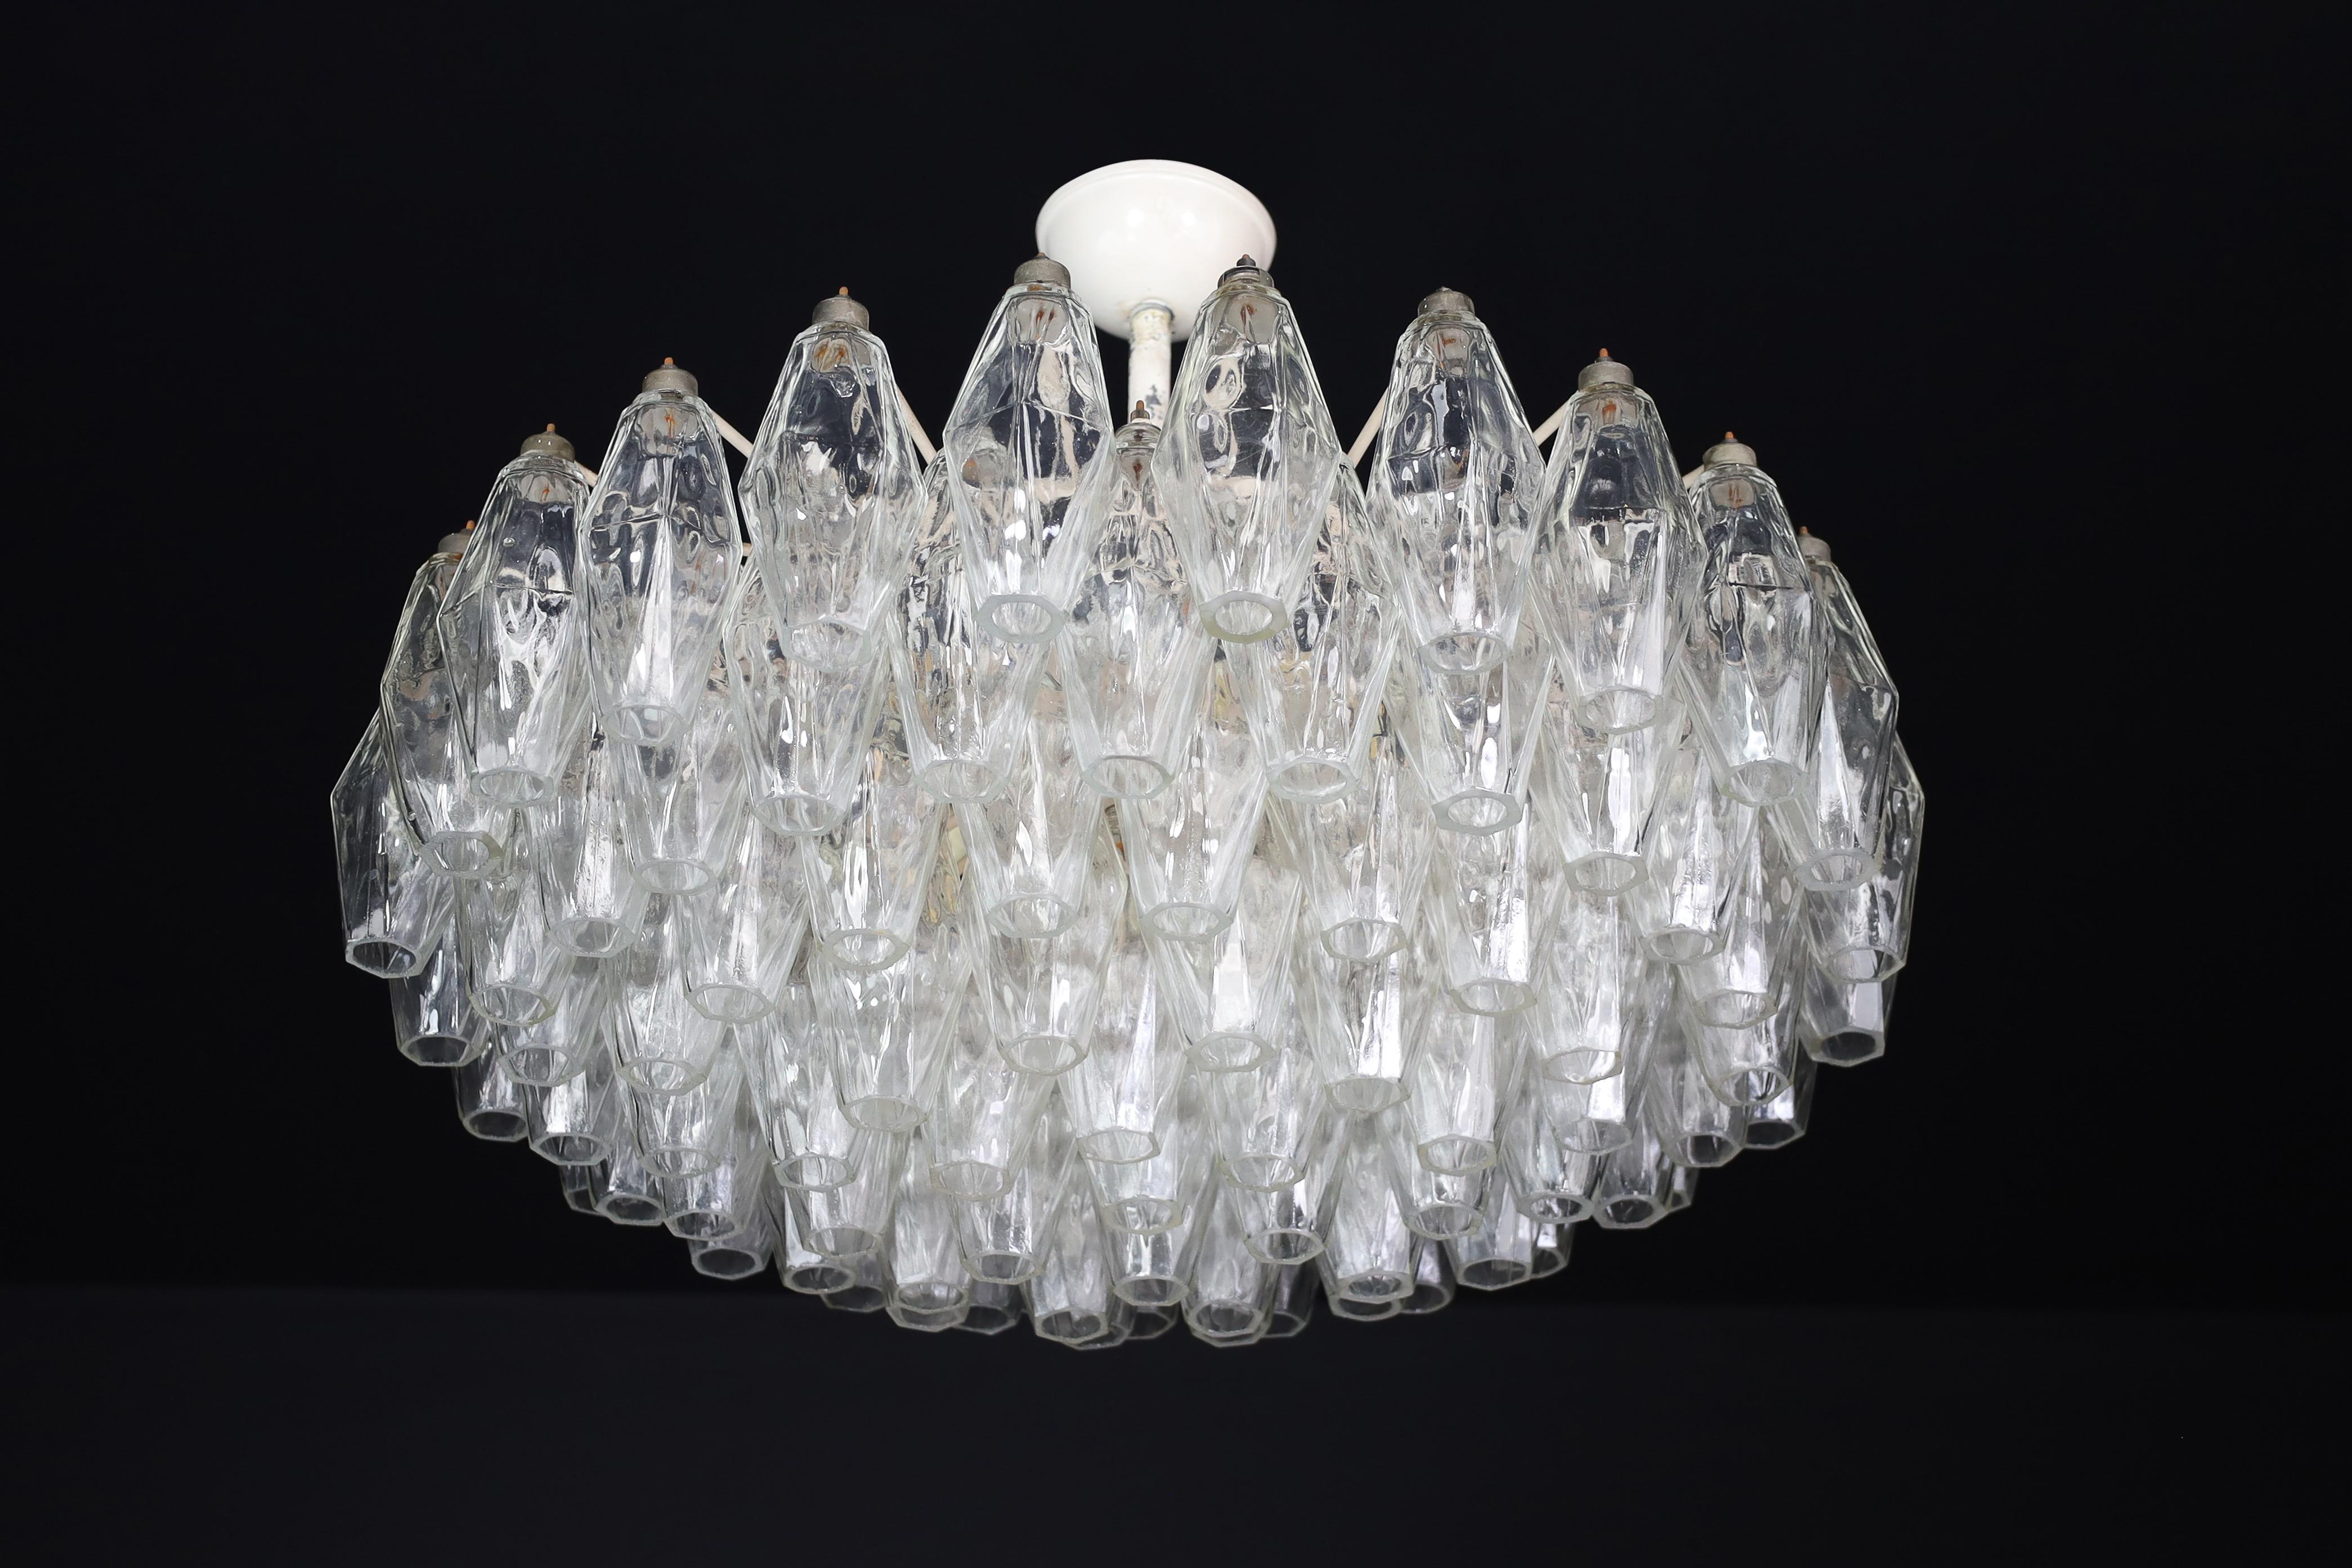 MiCarlo Scarpa Poliedri Chandeliers for Venini, Murano, Italy, 1960s.

We have two exquisite mid-century Venini Murano glass chandeliers for sale, designed by Carlo Scarpa in Italy in the 1950s. The chandeliers feature an impressive array of